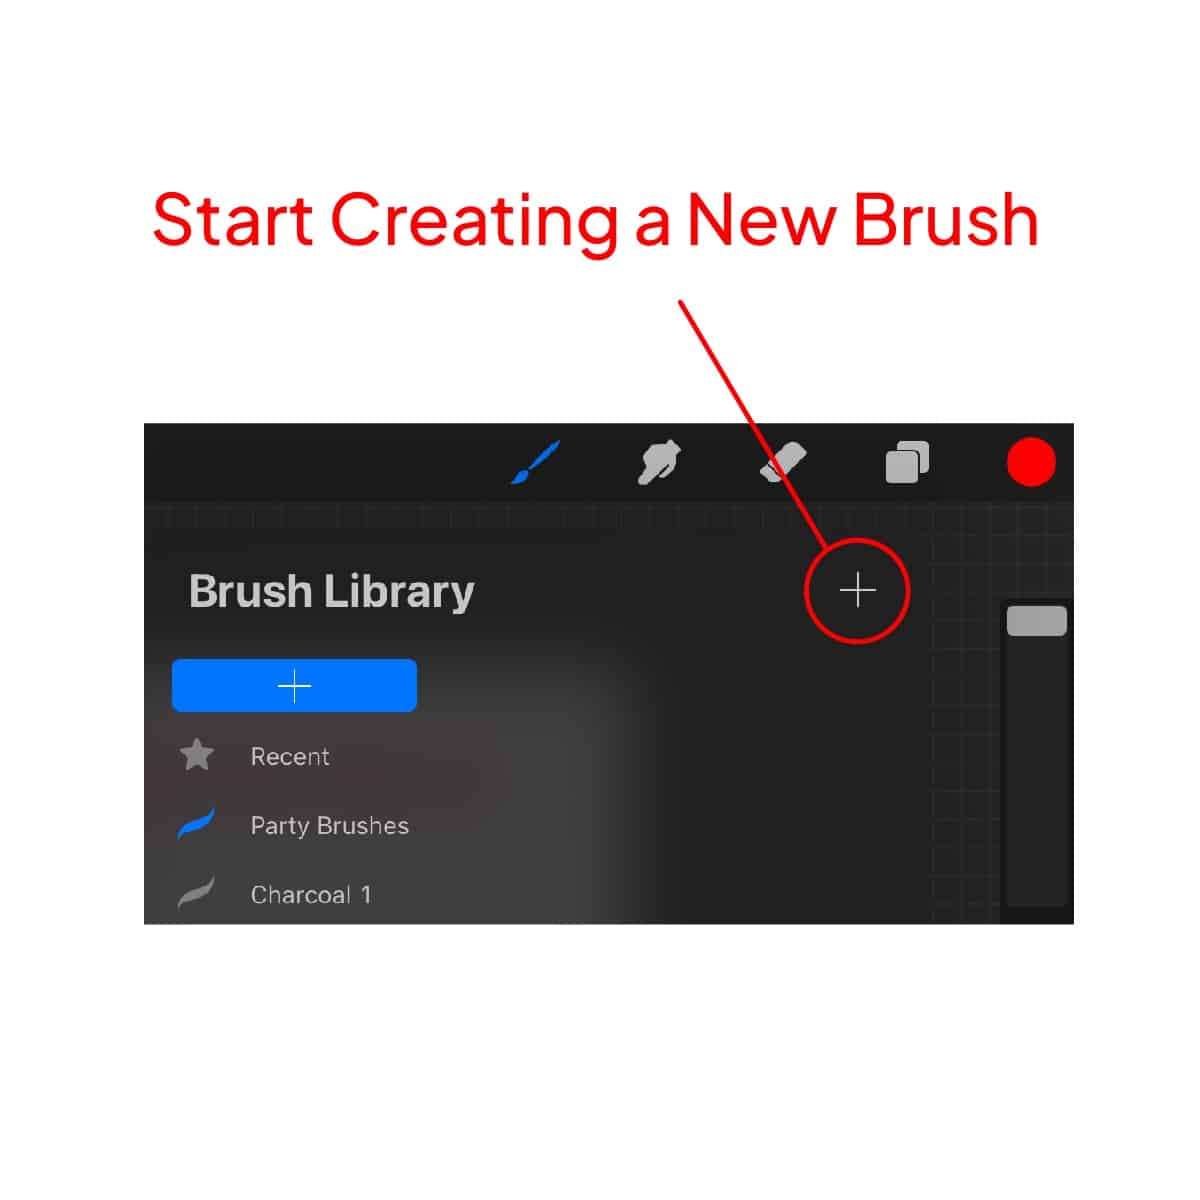 Creating a new brush